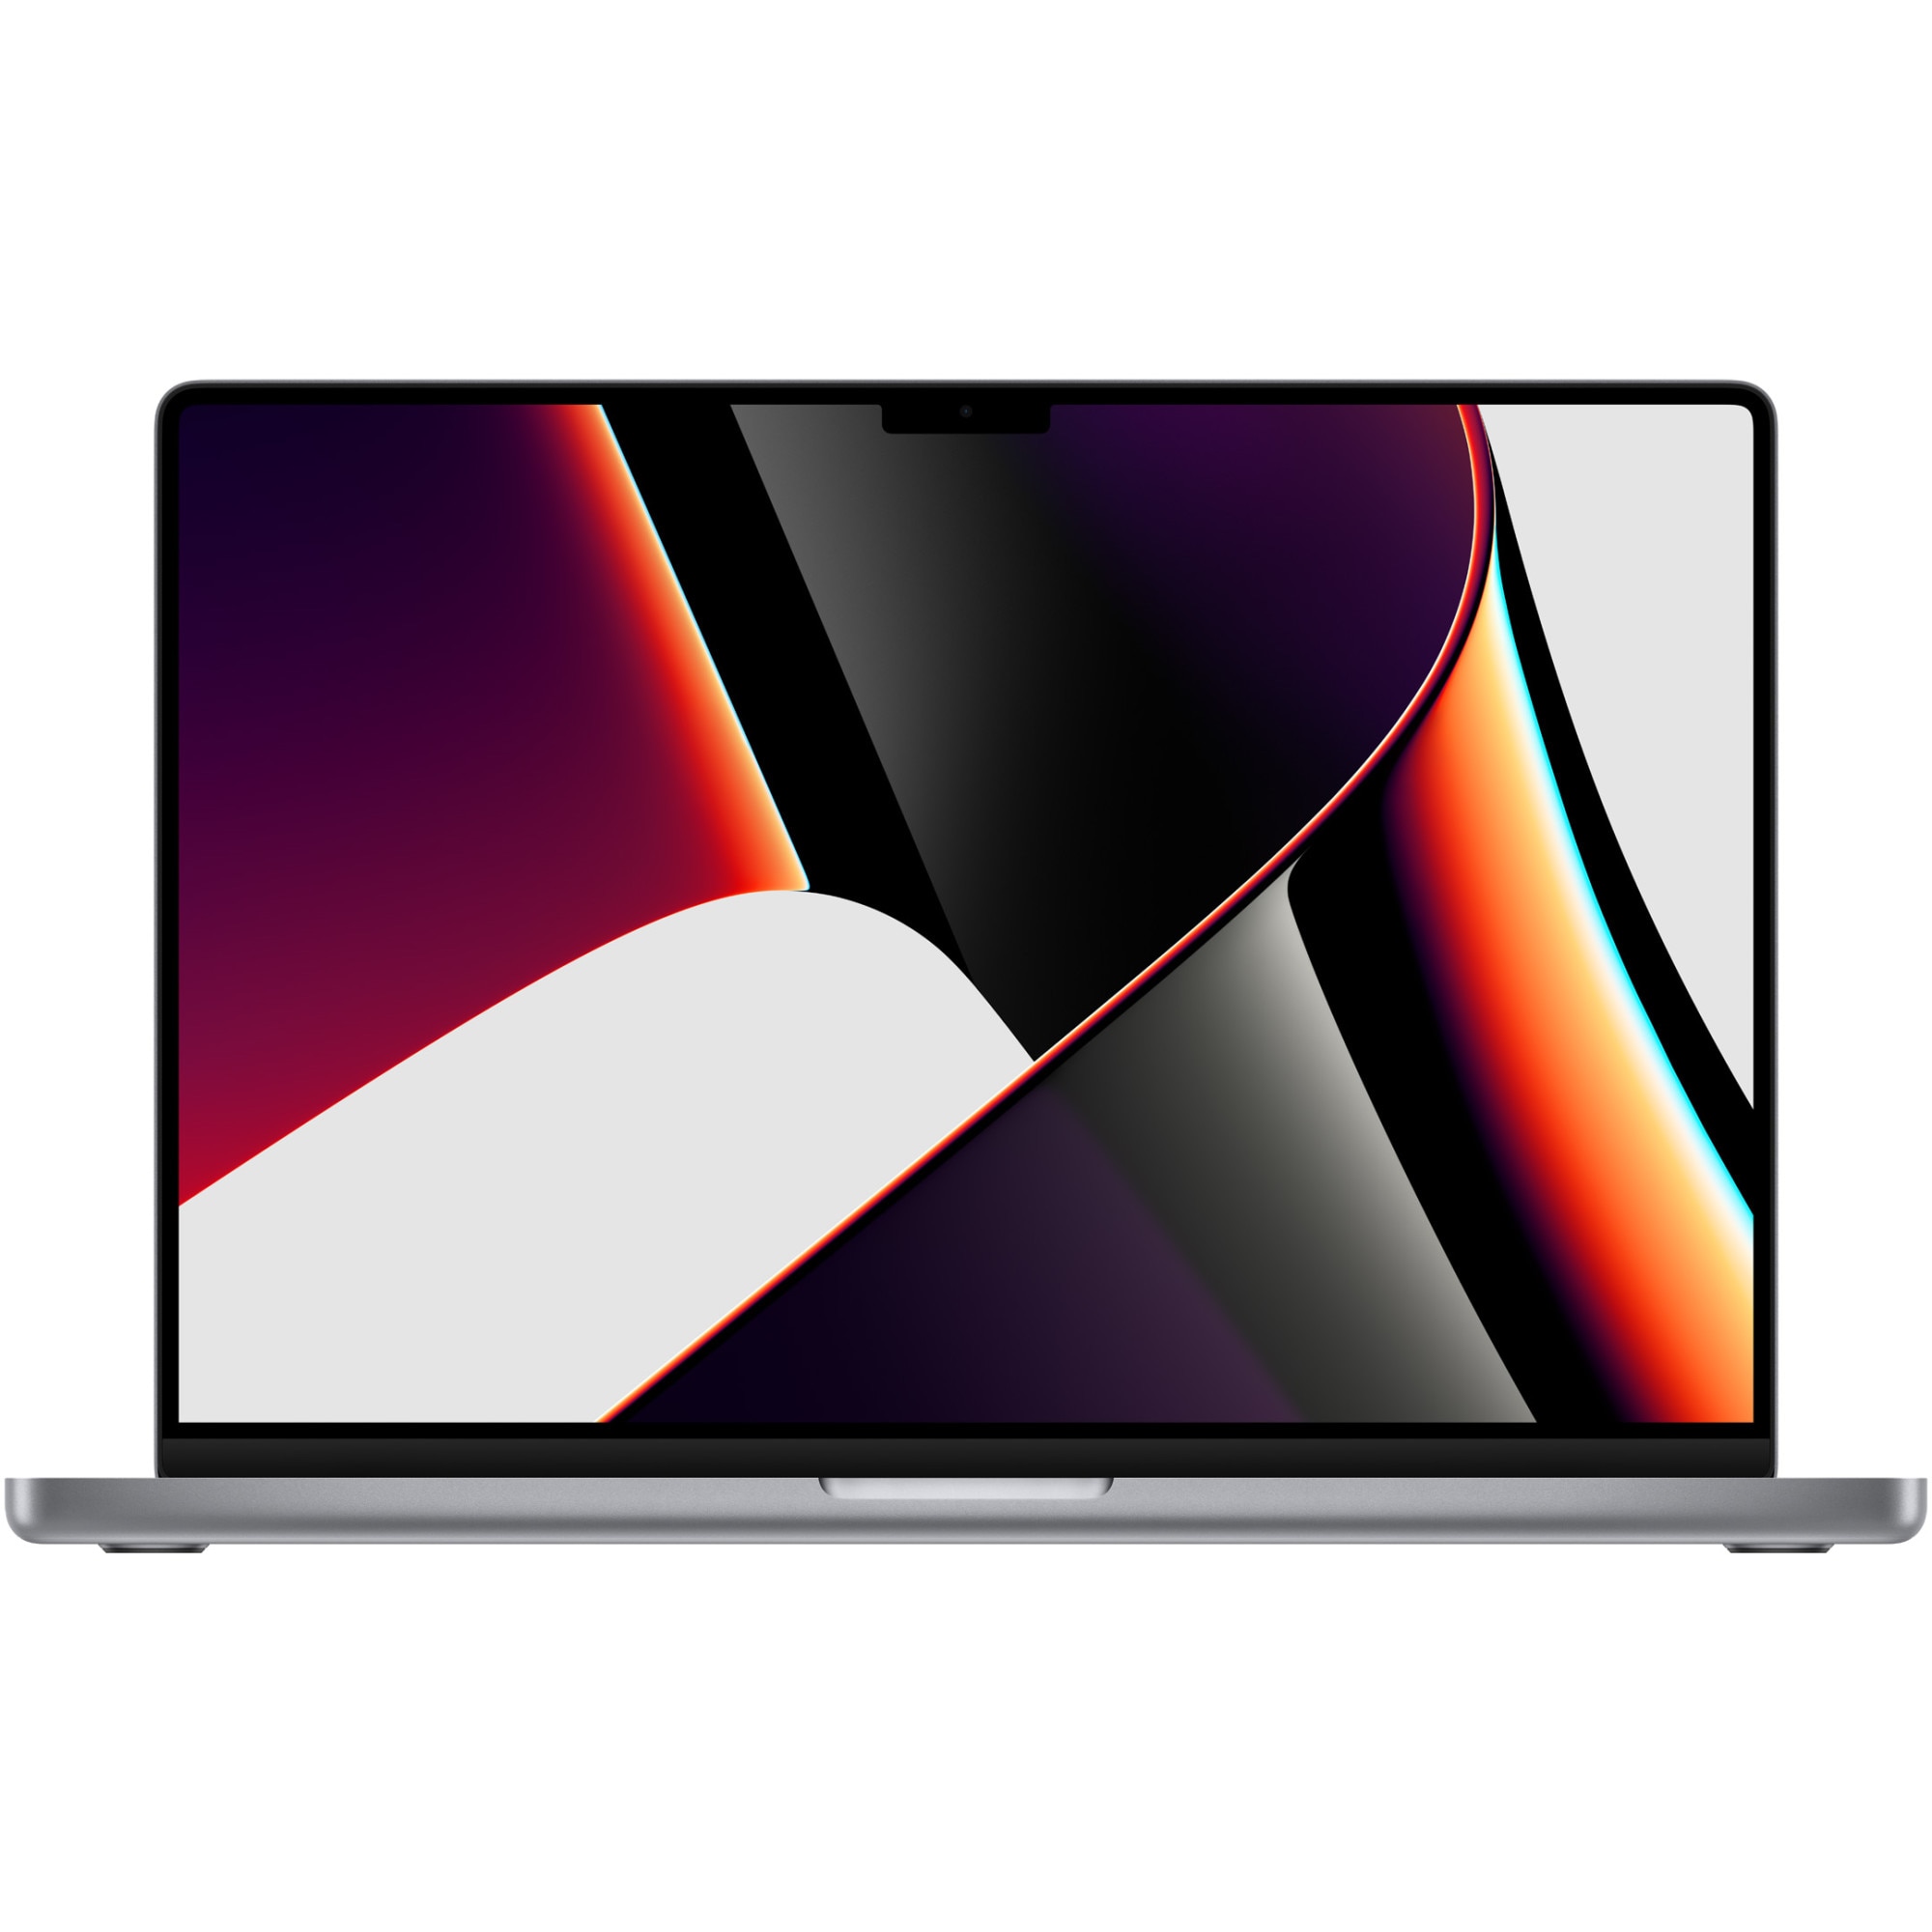 Fotografie Laptop Apple MacBook Pro 16 (2021) cu procesor Apple M1 Pro chip with 10 nuclee CPU and 16 nuclee GPU, 16GB, 512GB SSD, Space Grey, RO Kb